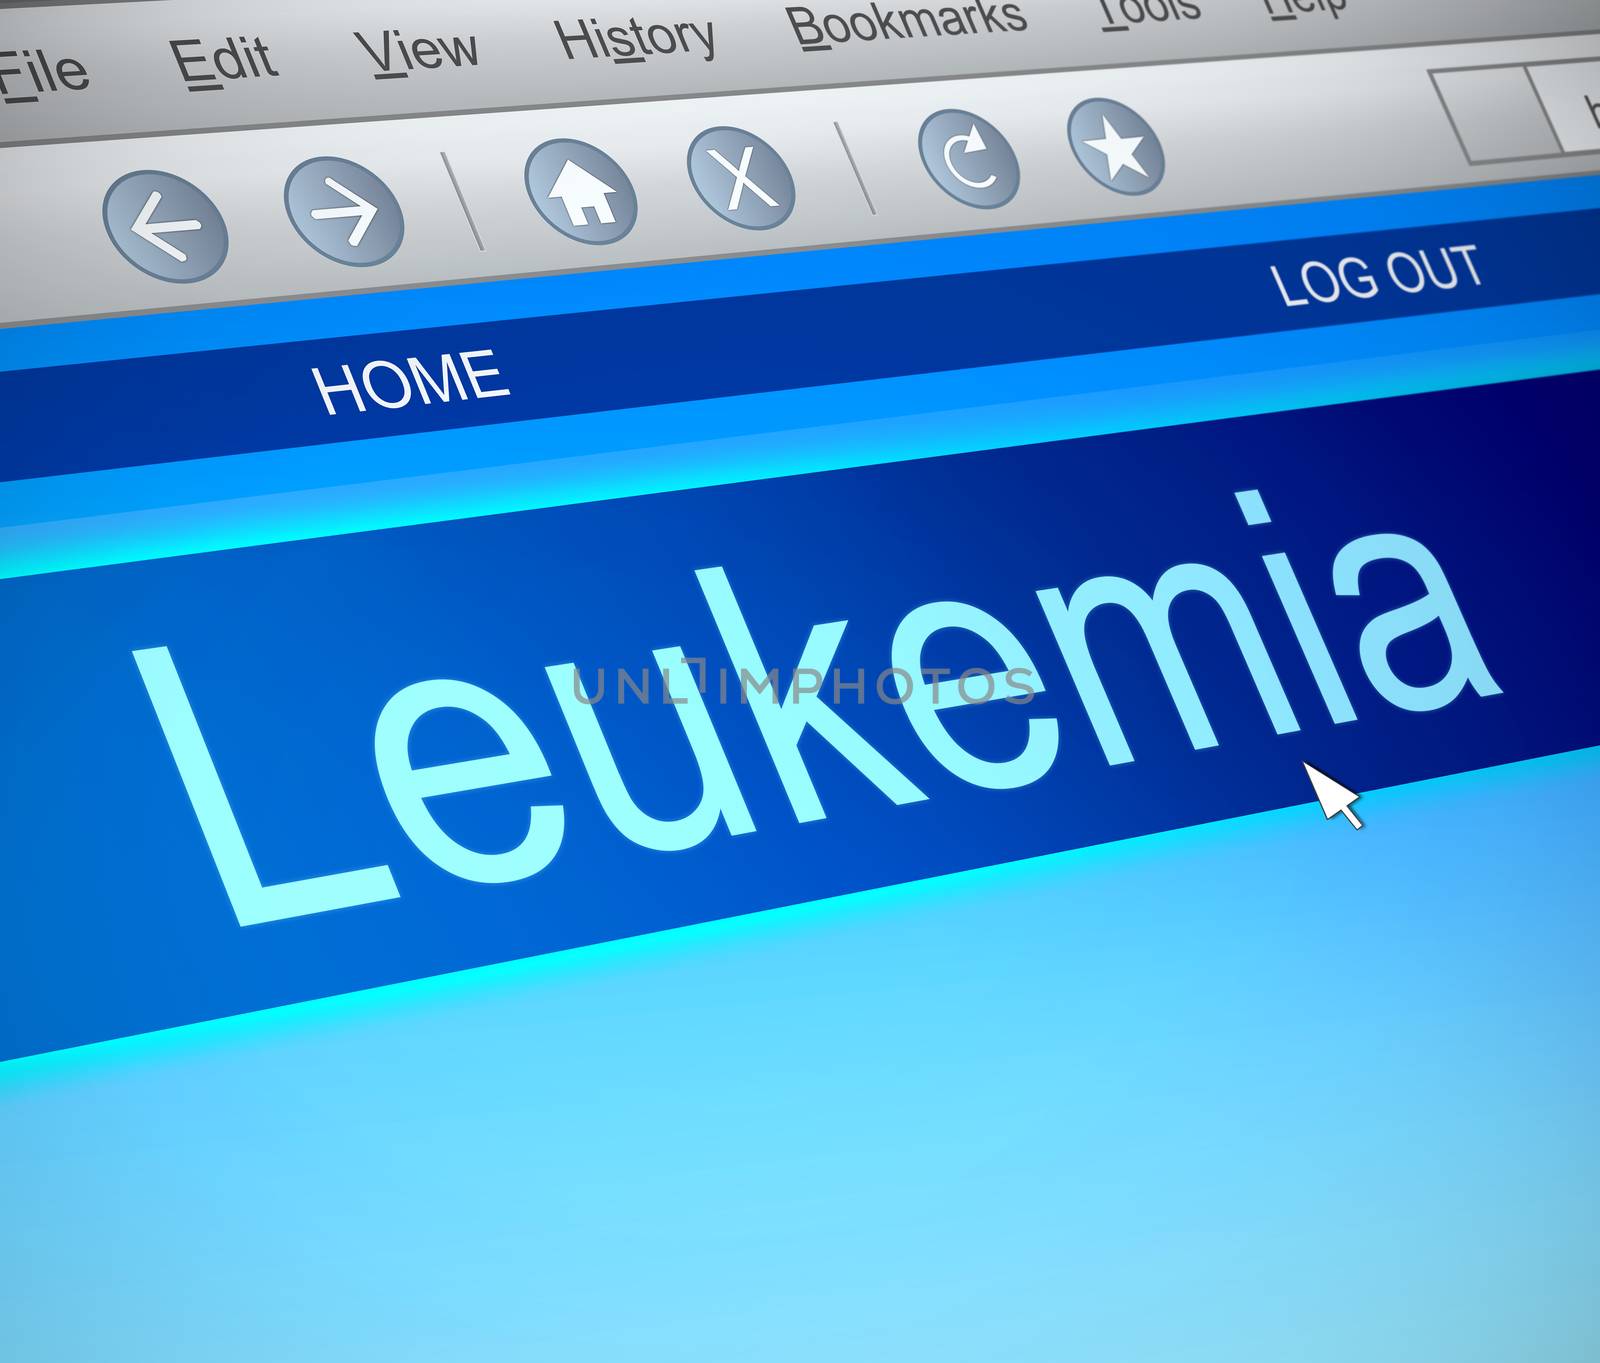 Illustration depicting a computer screen capture with a Leukemia concept.